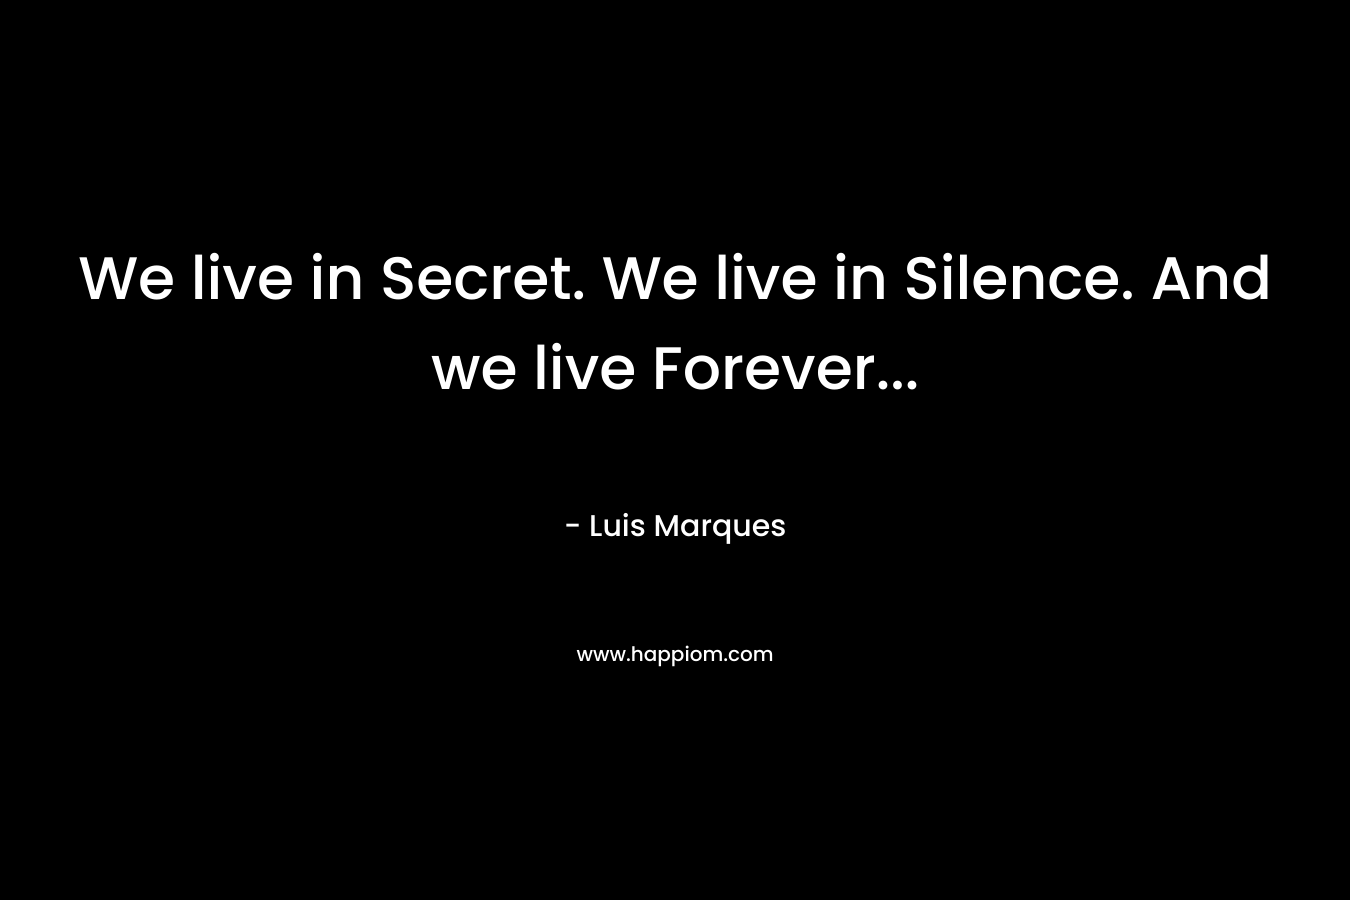 We live in Secret. We live in Silence. And we live Forever...